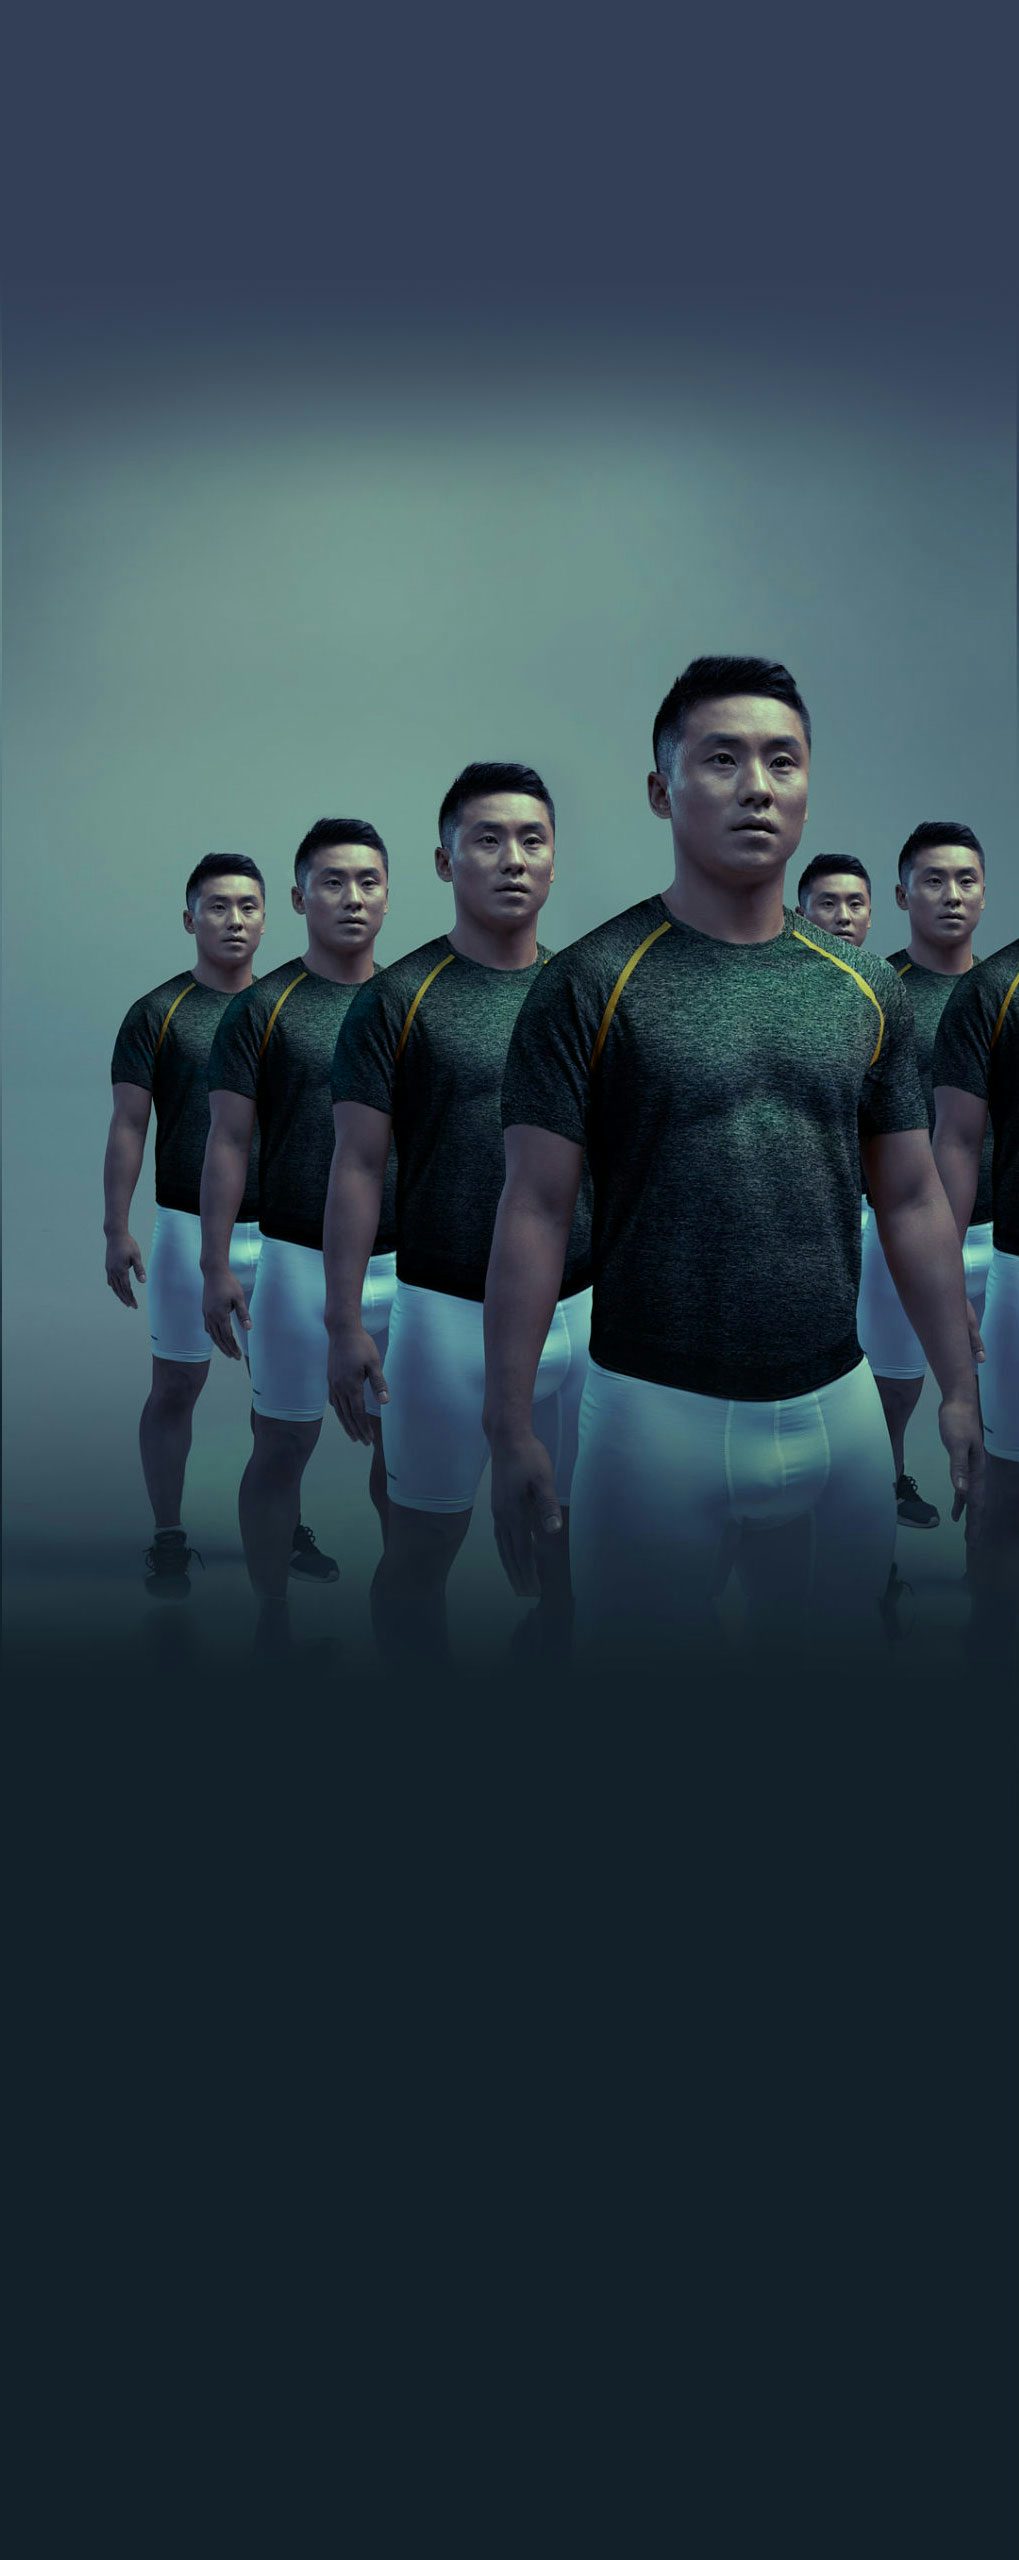 An Asian/Pacific Islander man with clones of him standing next to each other in a dark background